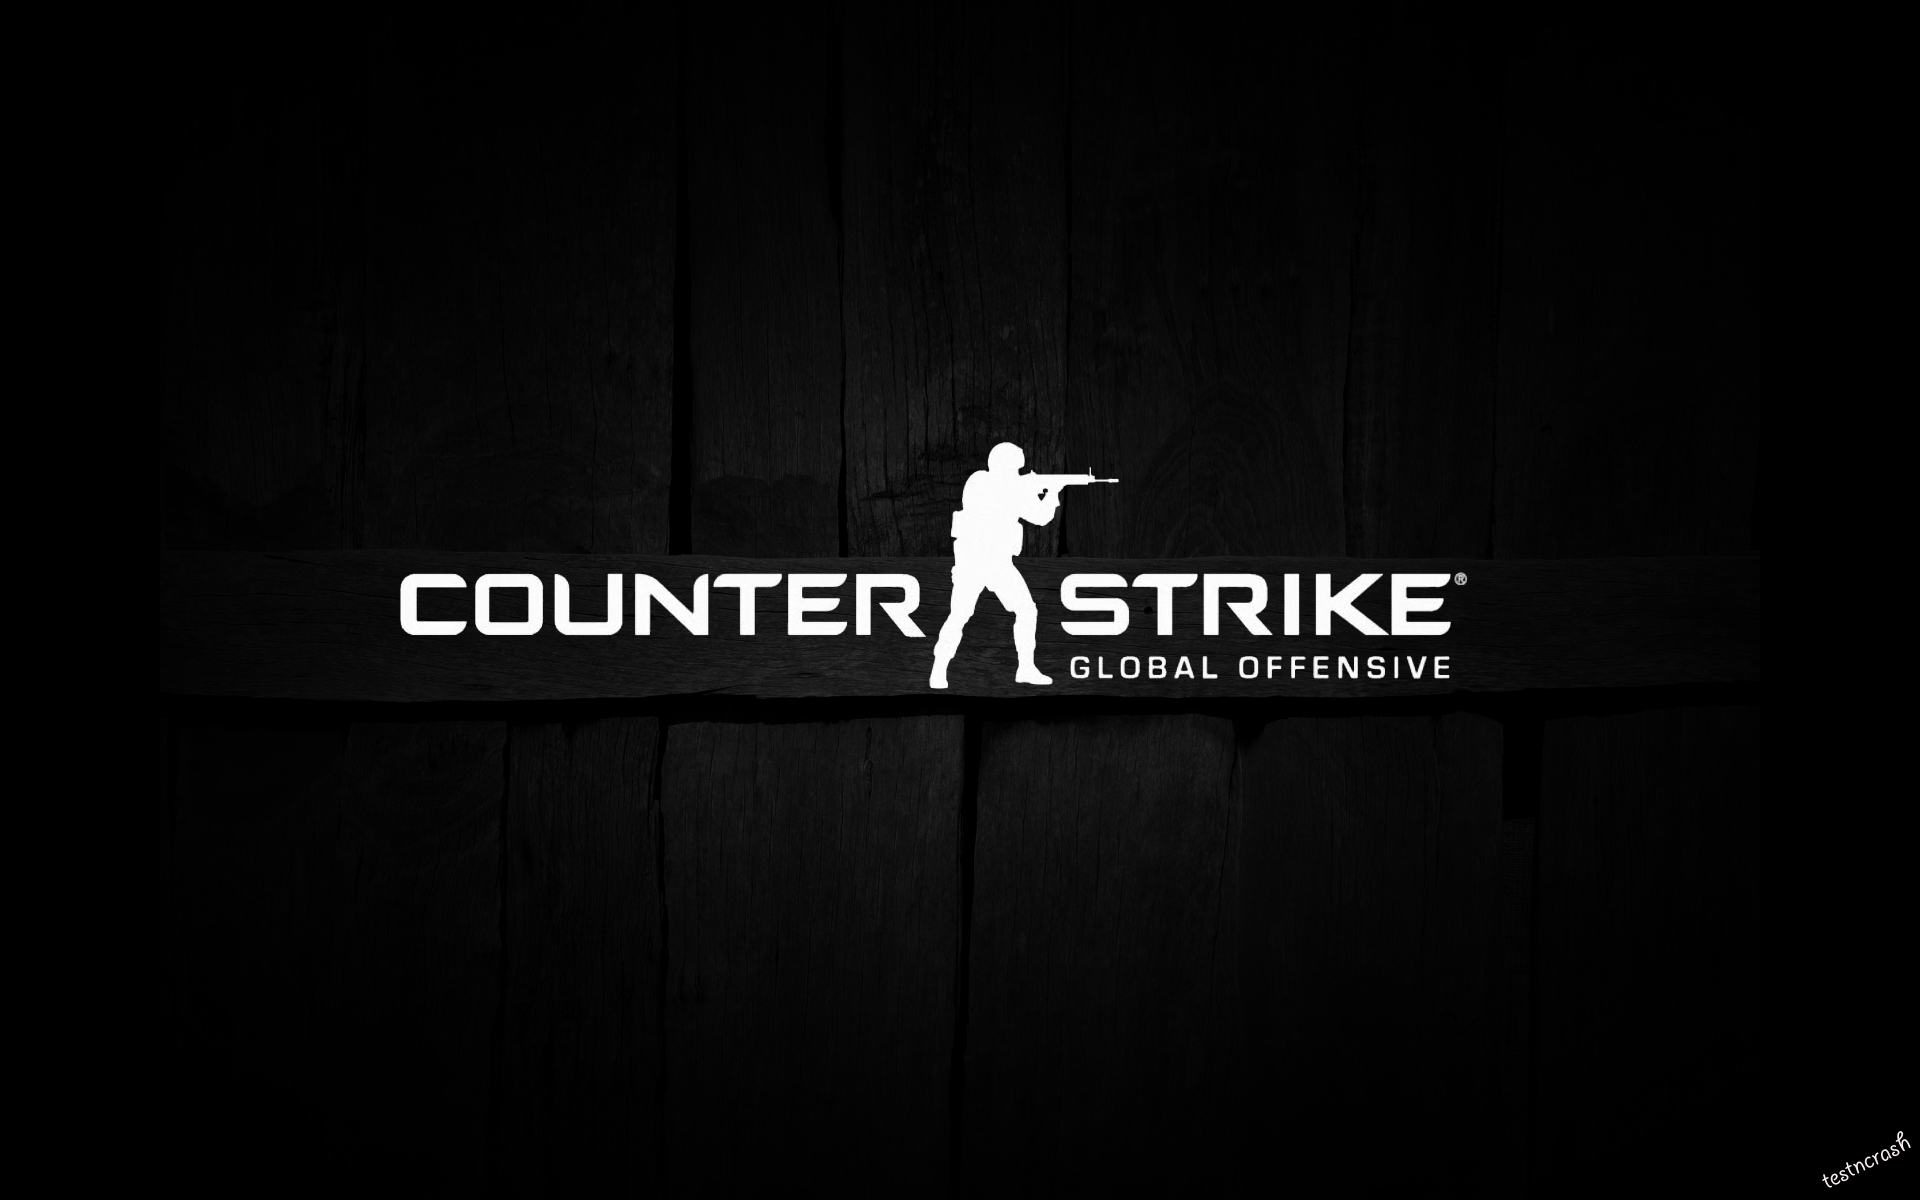 offensive strike global counter wallpaper wallpapers